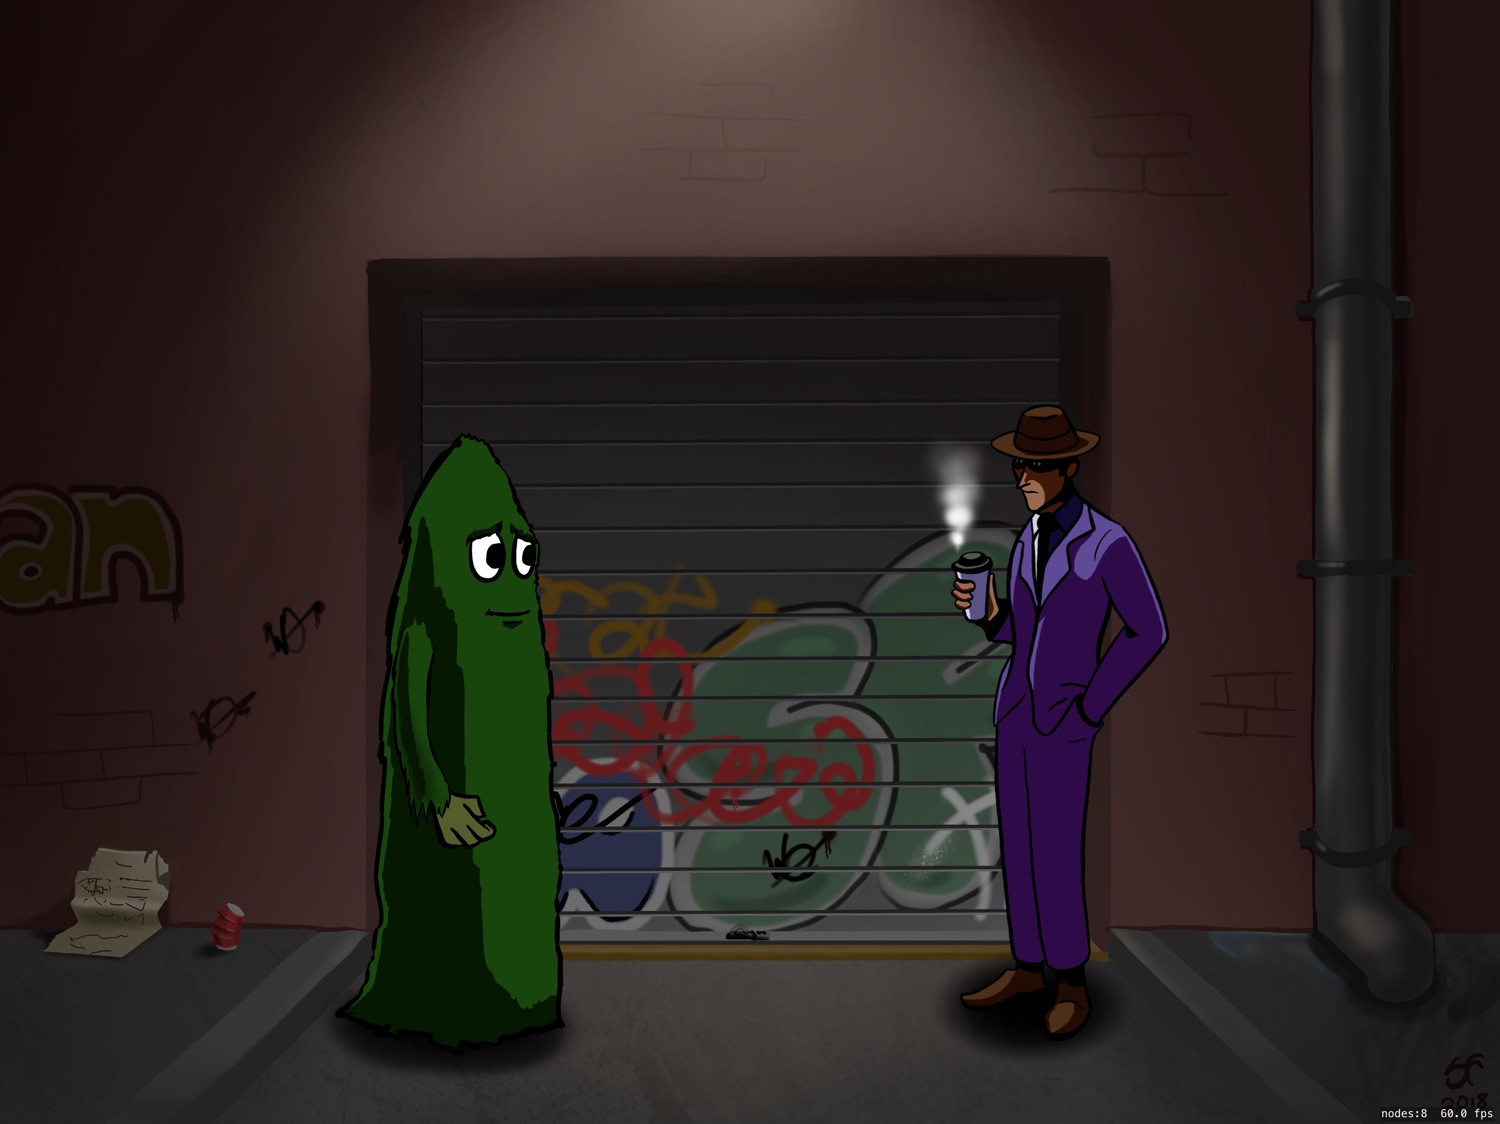 Another screenshot of a 2D Adventure game scene, where a green fuzzy monster is meeting a sinister man in a back alley